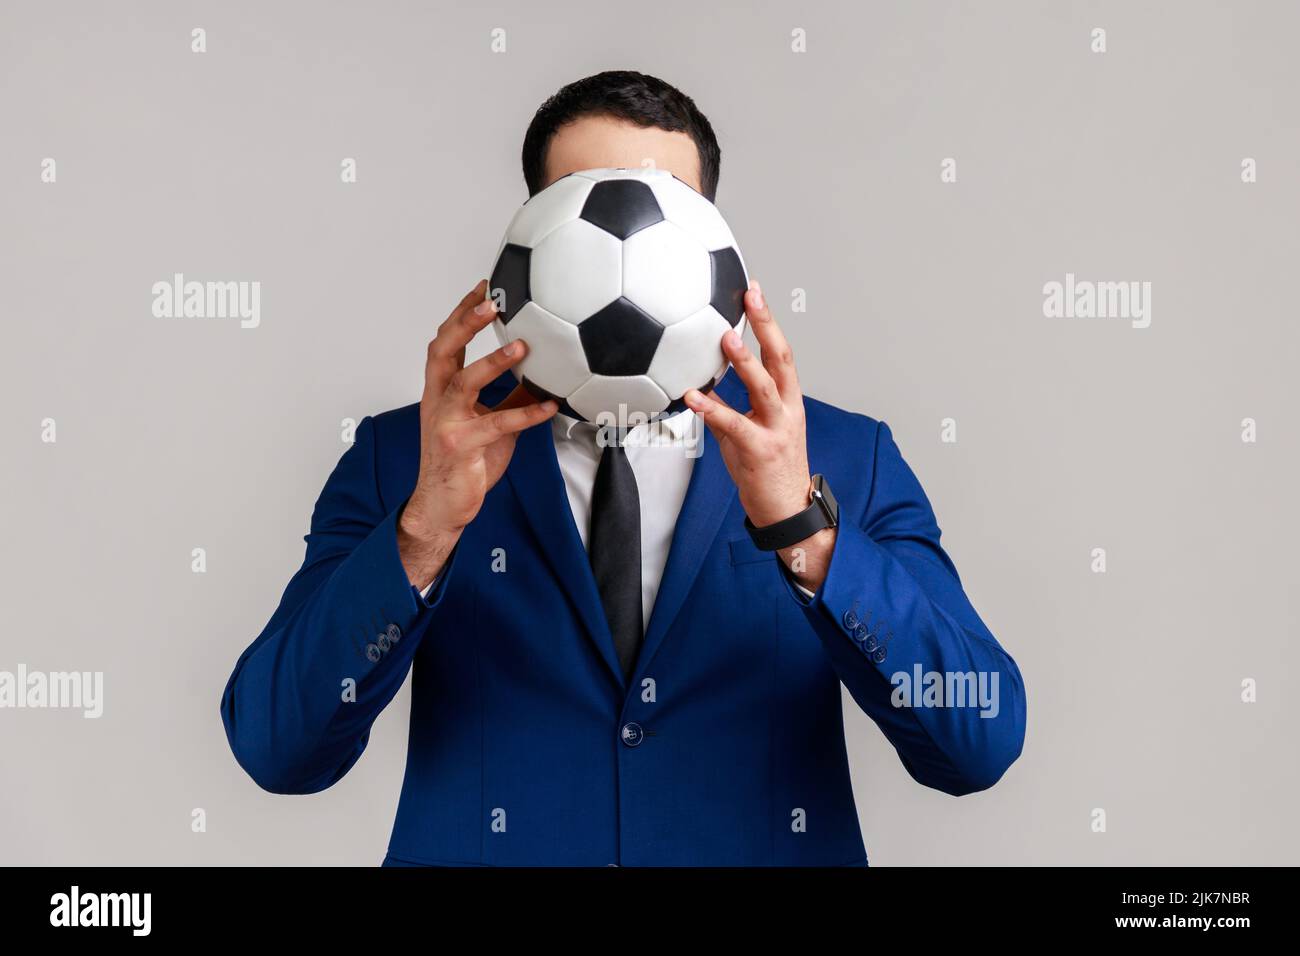 Portrait of unknown anonymous businessman supporting his favorite team covering face with soccer ball, wearing official style suit. Indoor studio shot isolated on gray background. Stock Photo